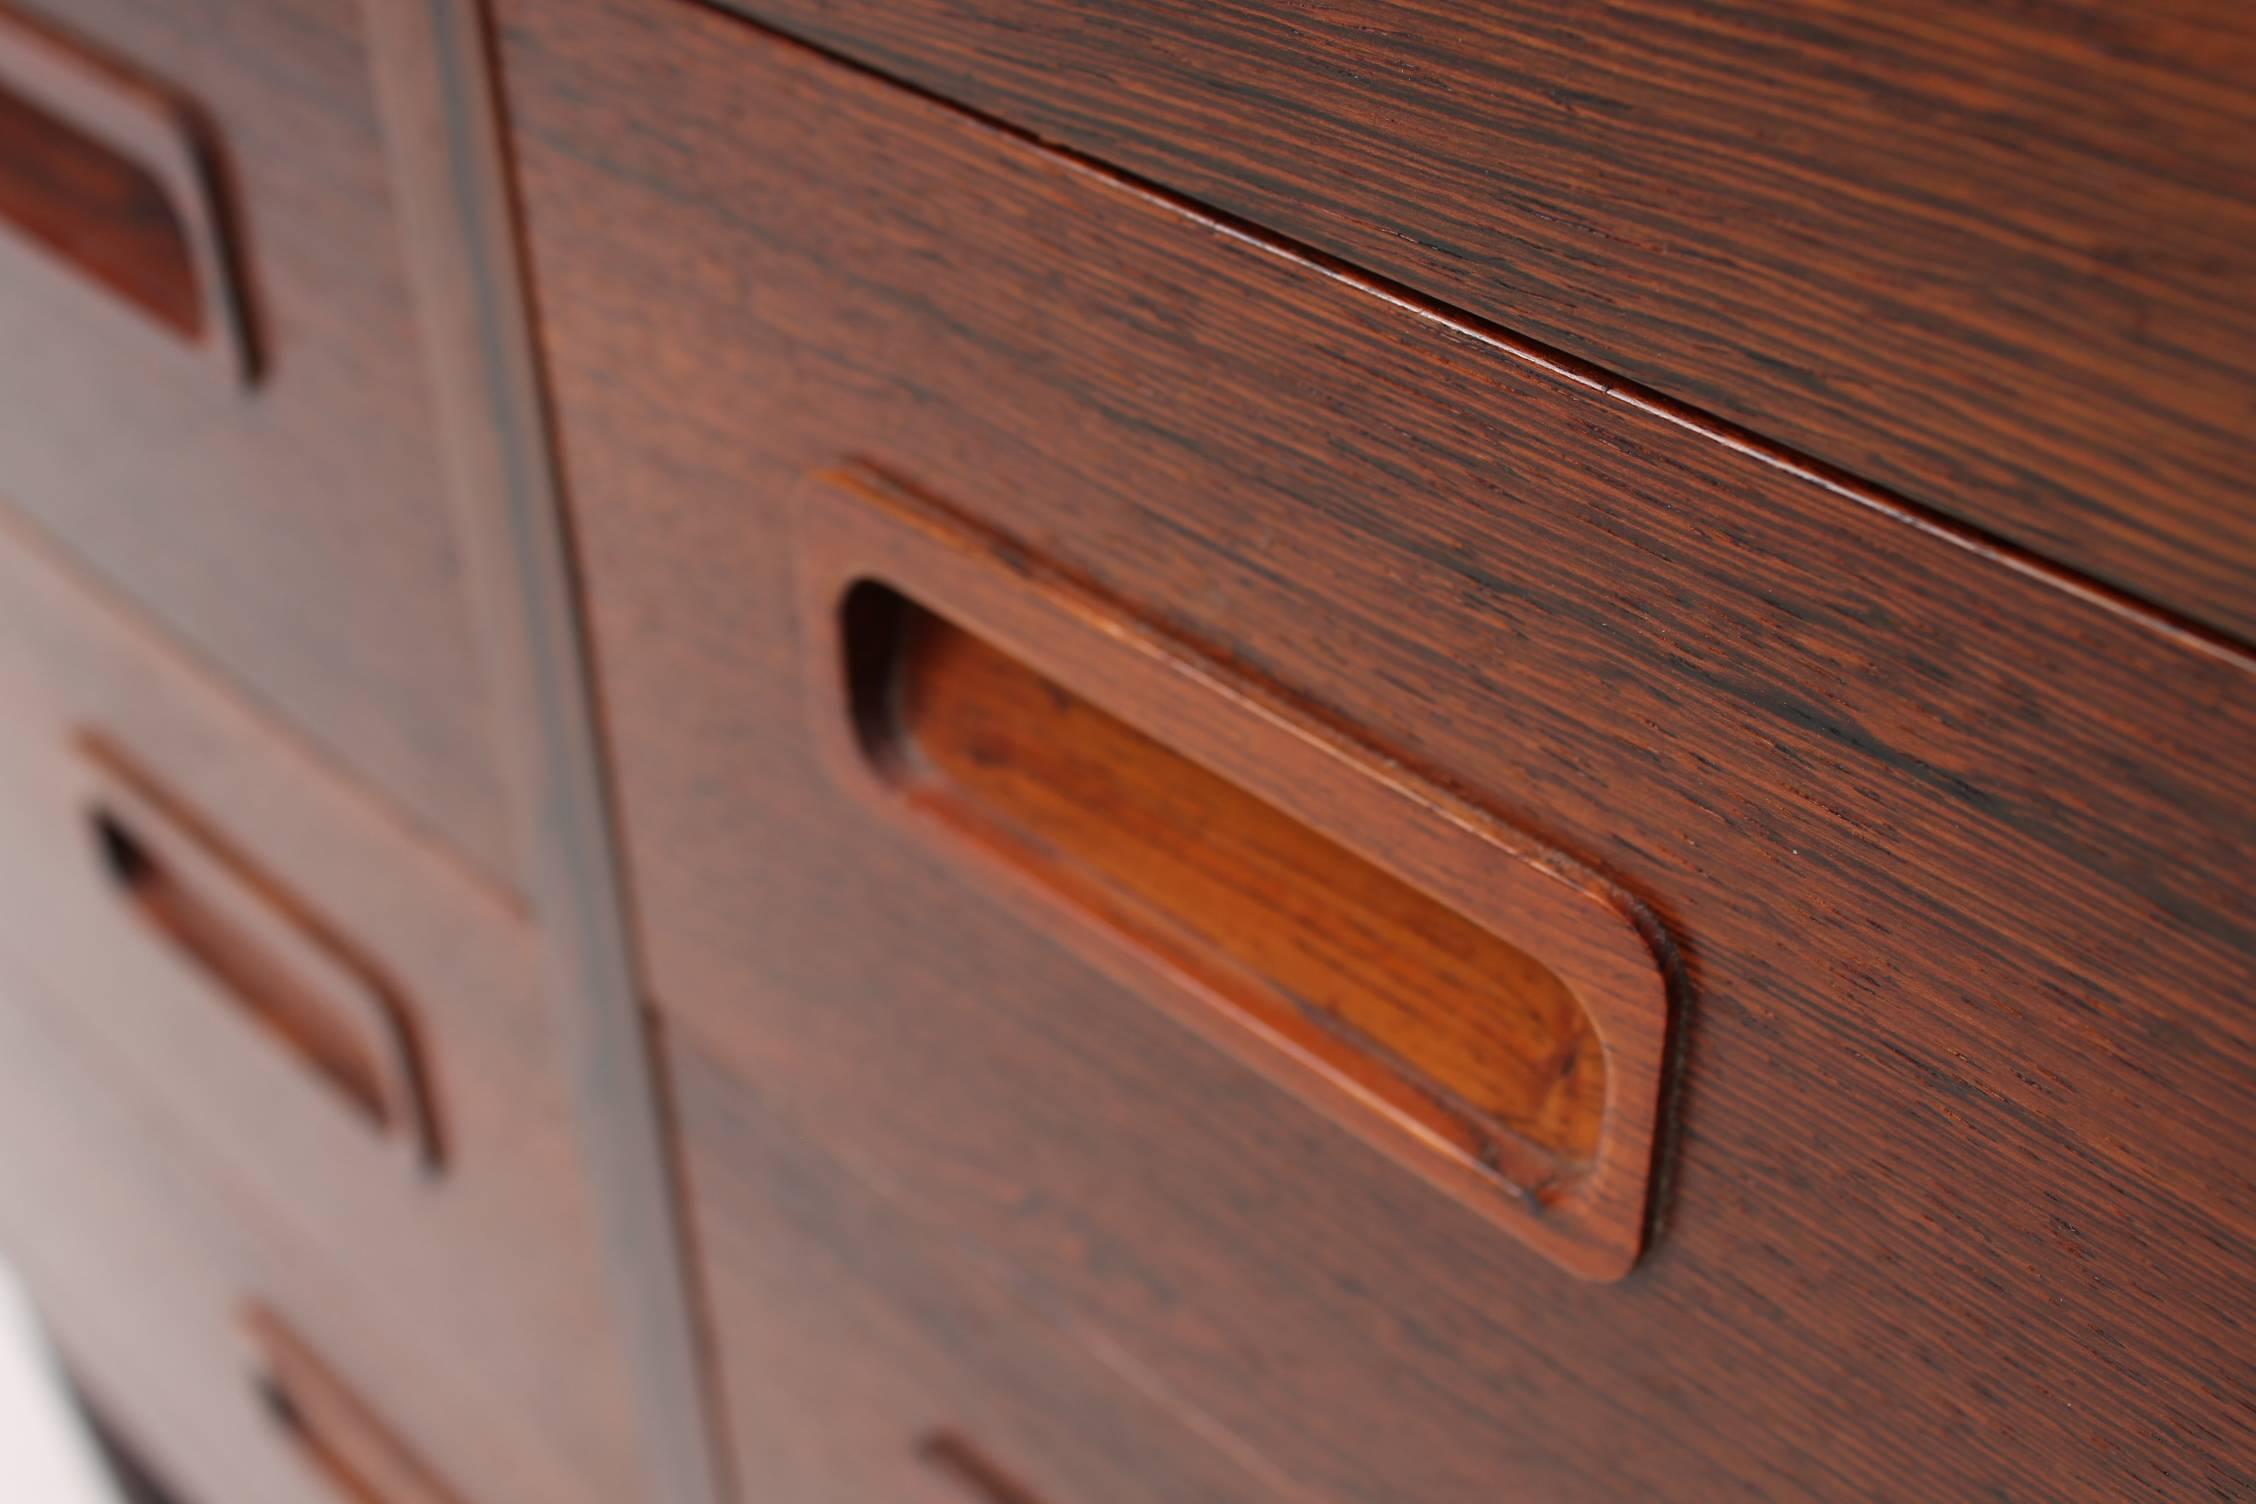 Mid-20th Century Rosewood Double Chest of Drawers by Poul Hundevad, Scandinavian Modern For Sale